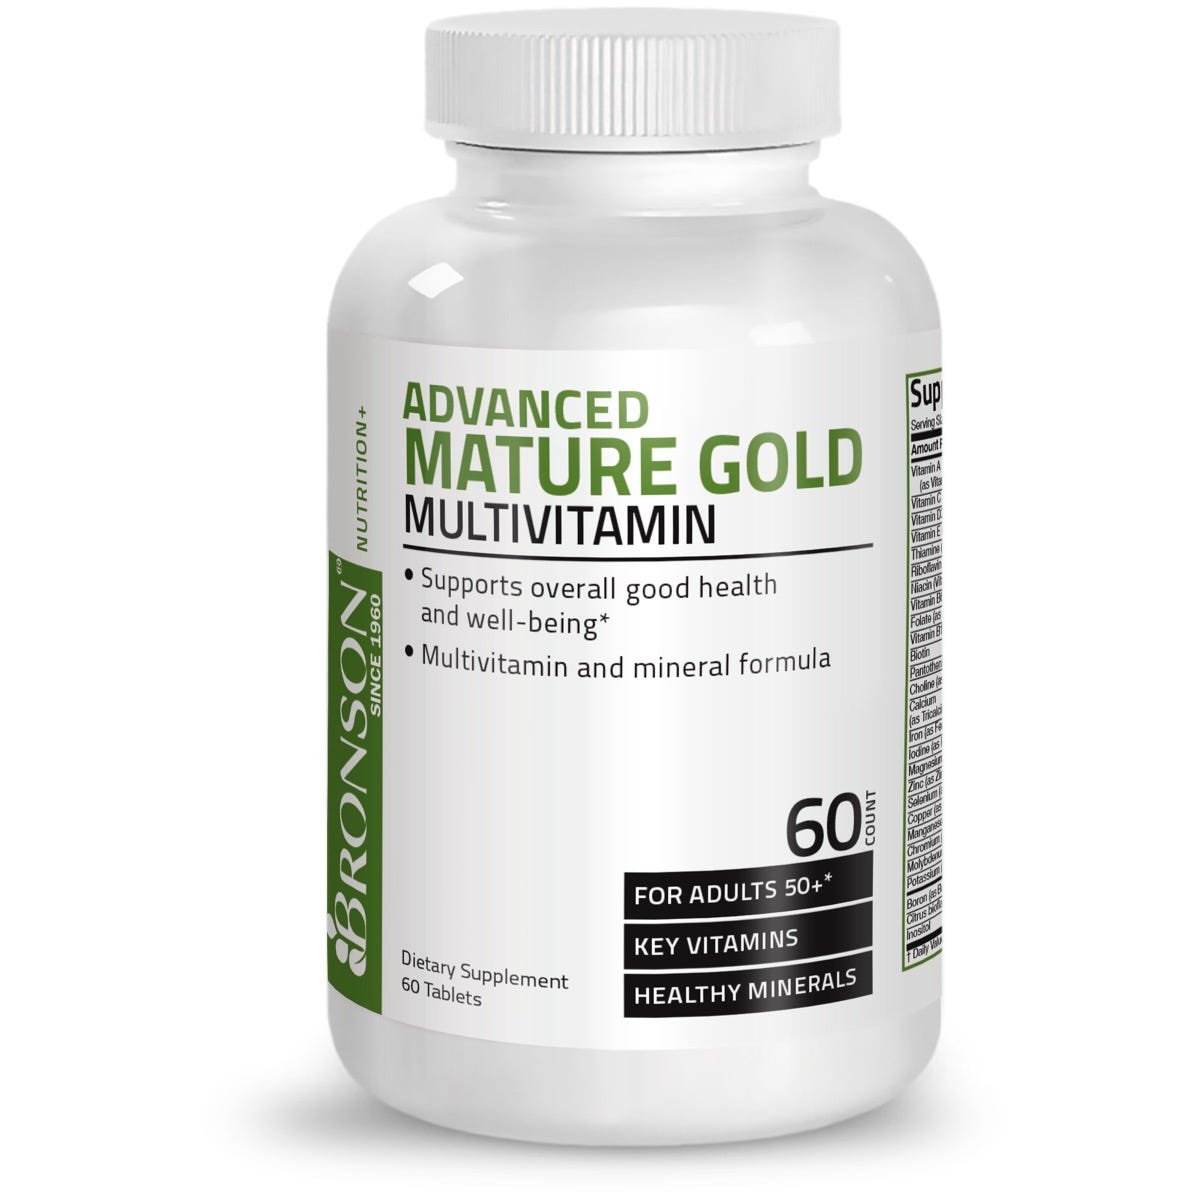 Advanced Mature Gold Once Daily Multivitamin for Adults Over 50 view 1 of 4